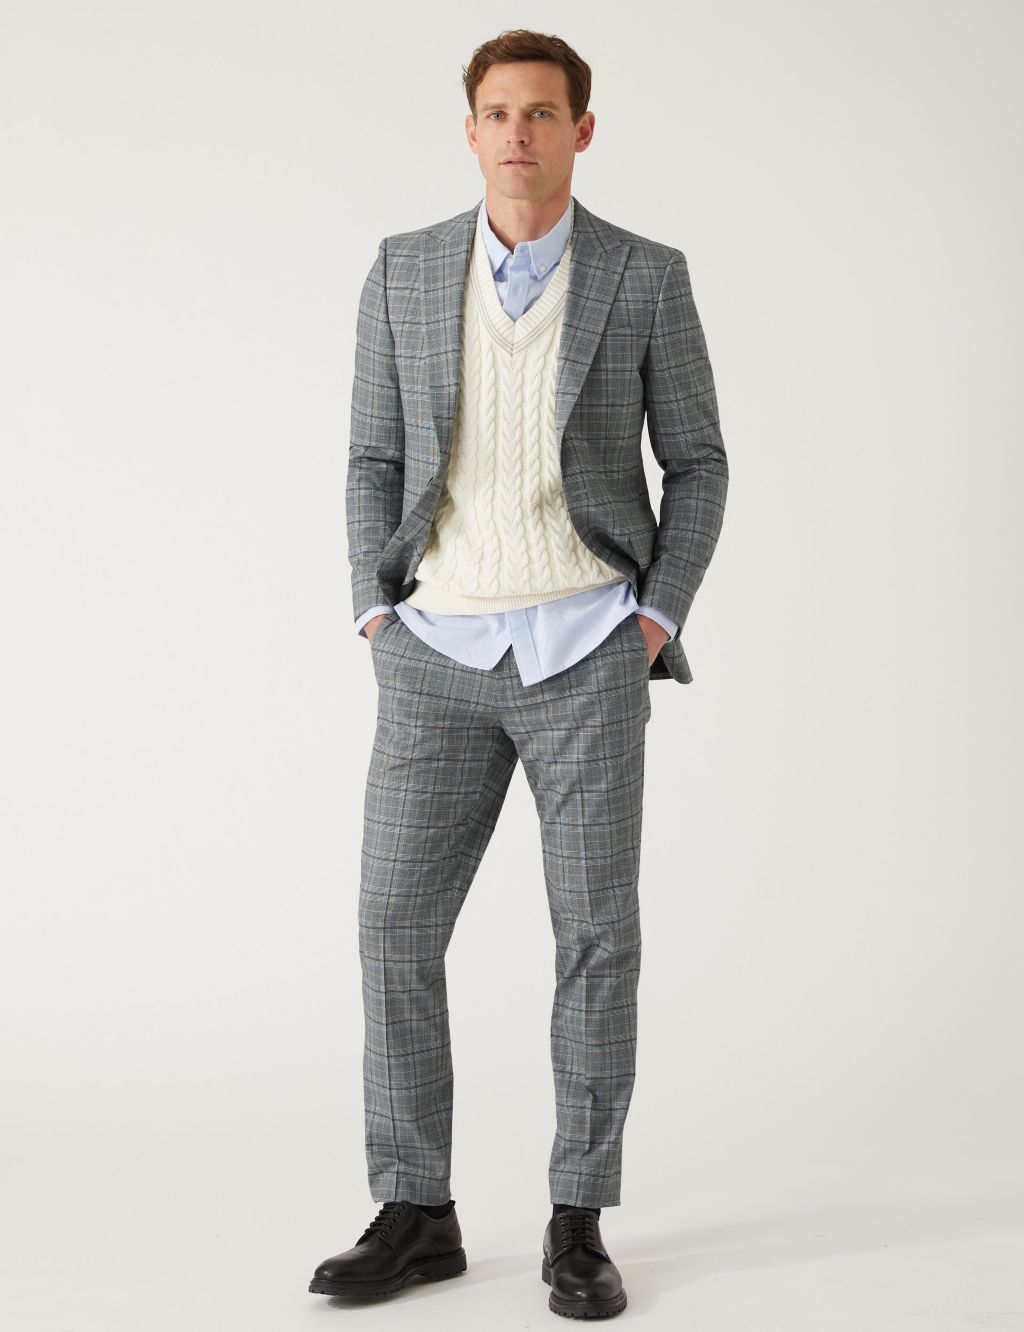 Slim Fit Prince of Wales Check Suit image 6